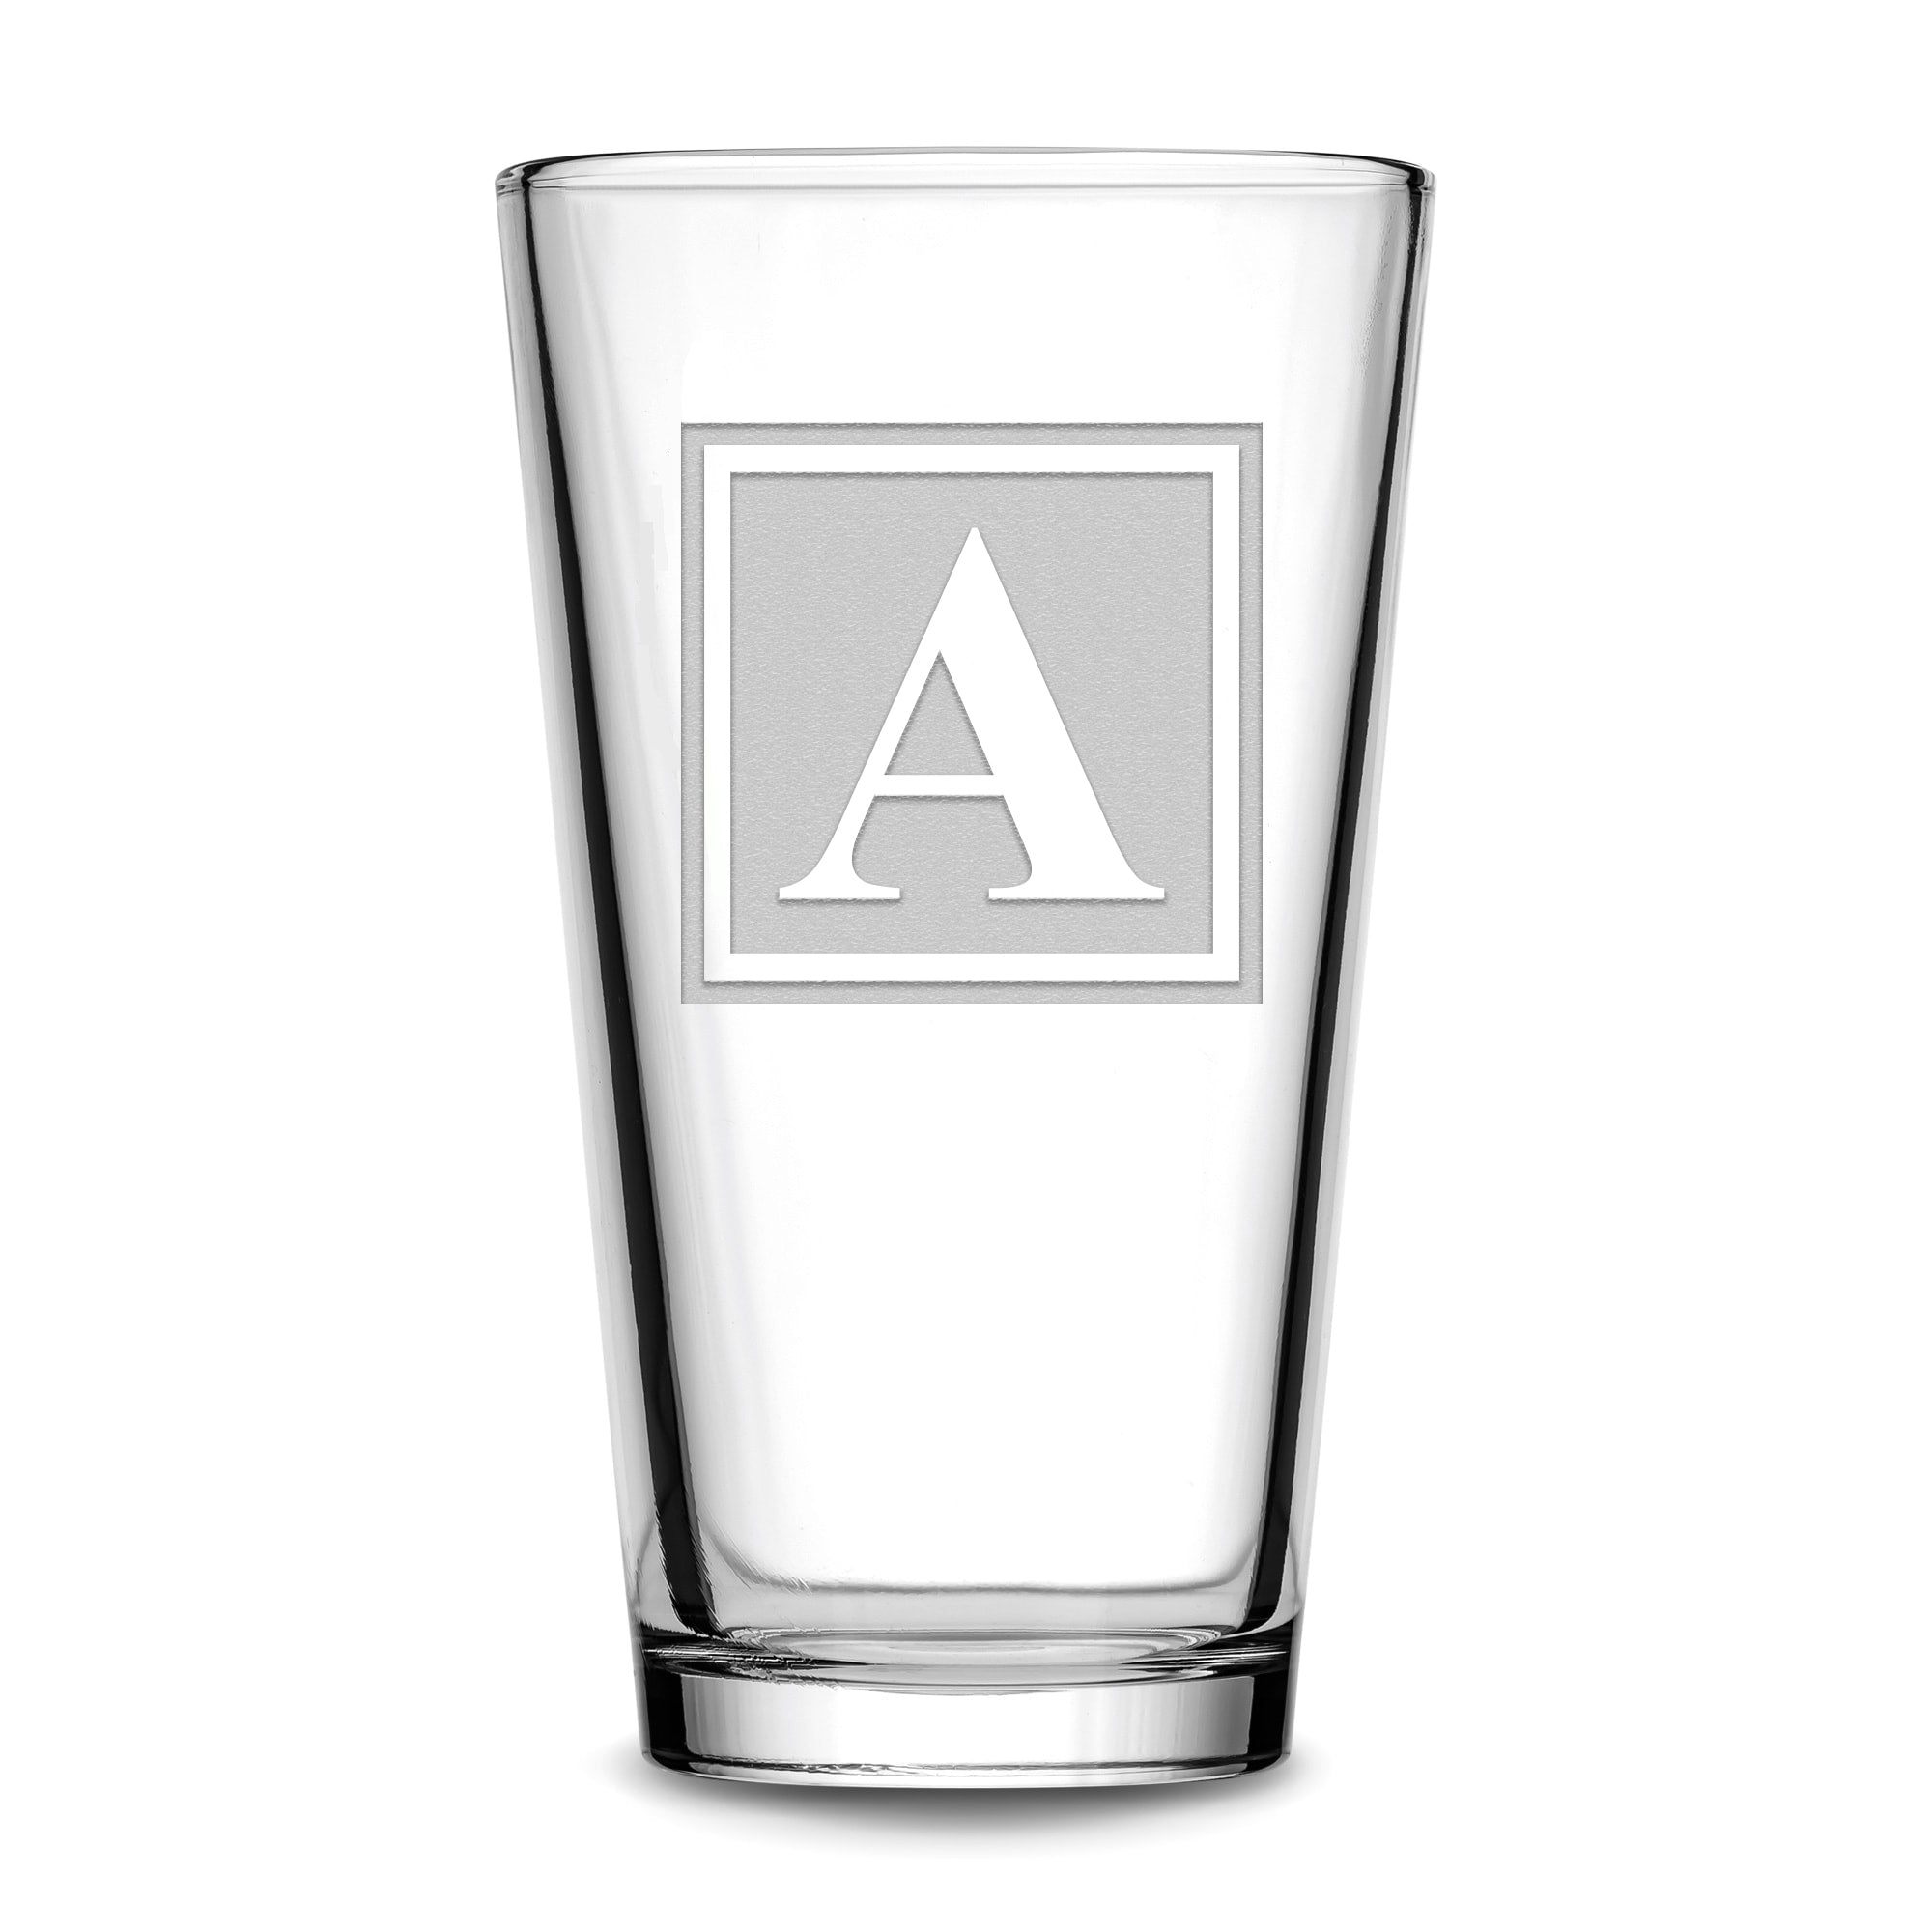 Customizable Monogram Etched Pint Glass, Beer Glass, 16oz